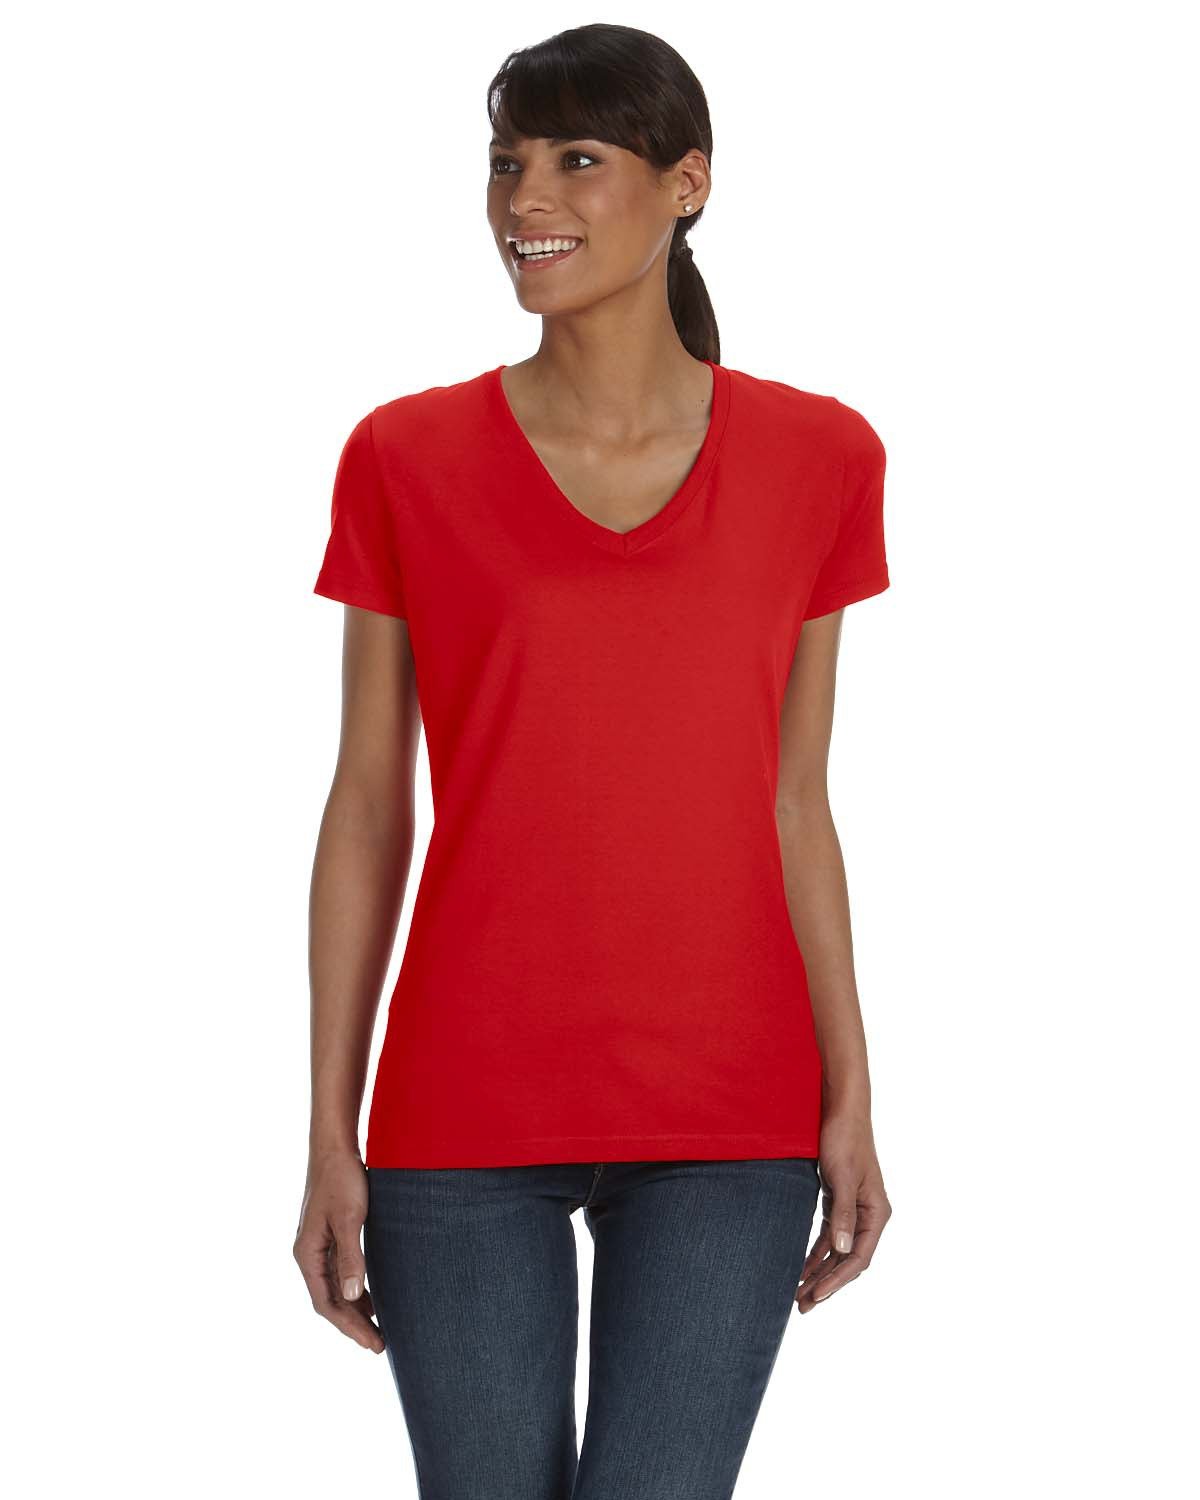 Fruit of the Loom Ladies' HD Cotton™ V-Neck T-Shirt TRUE RED 